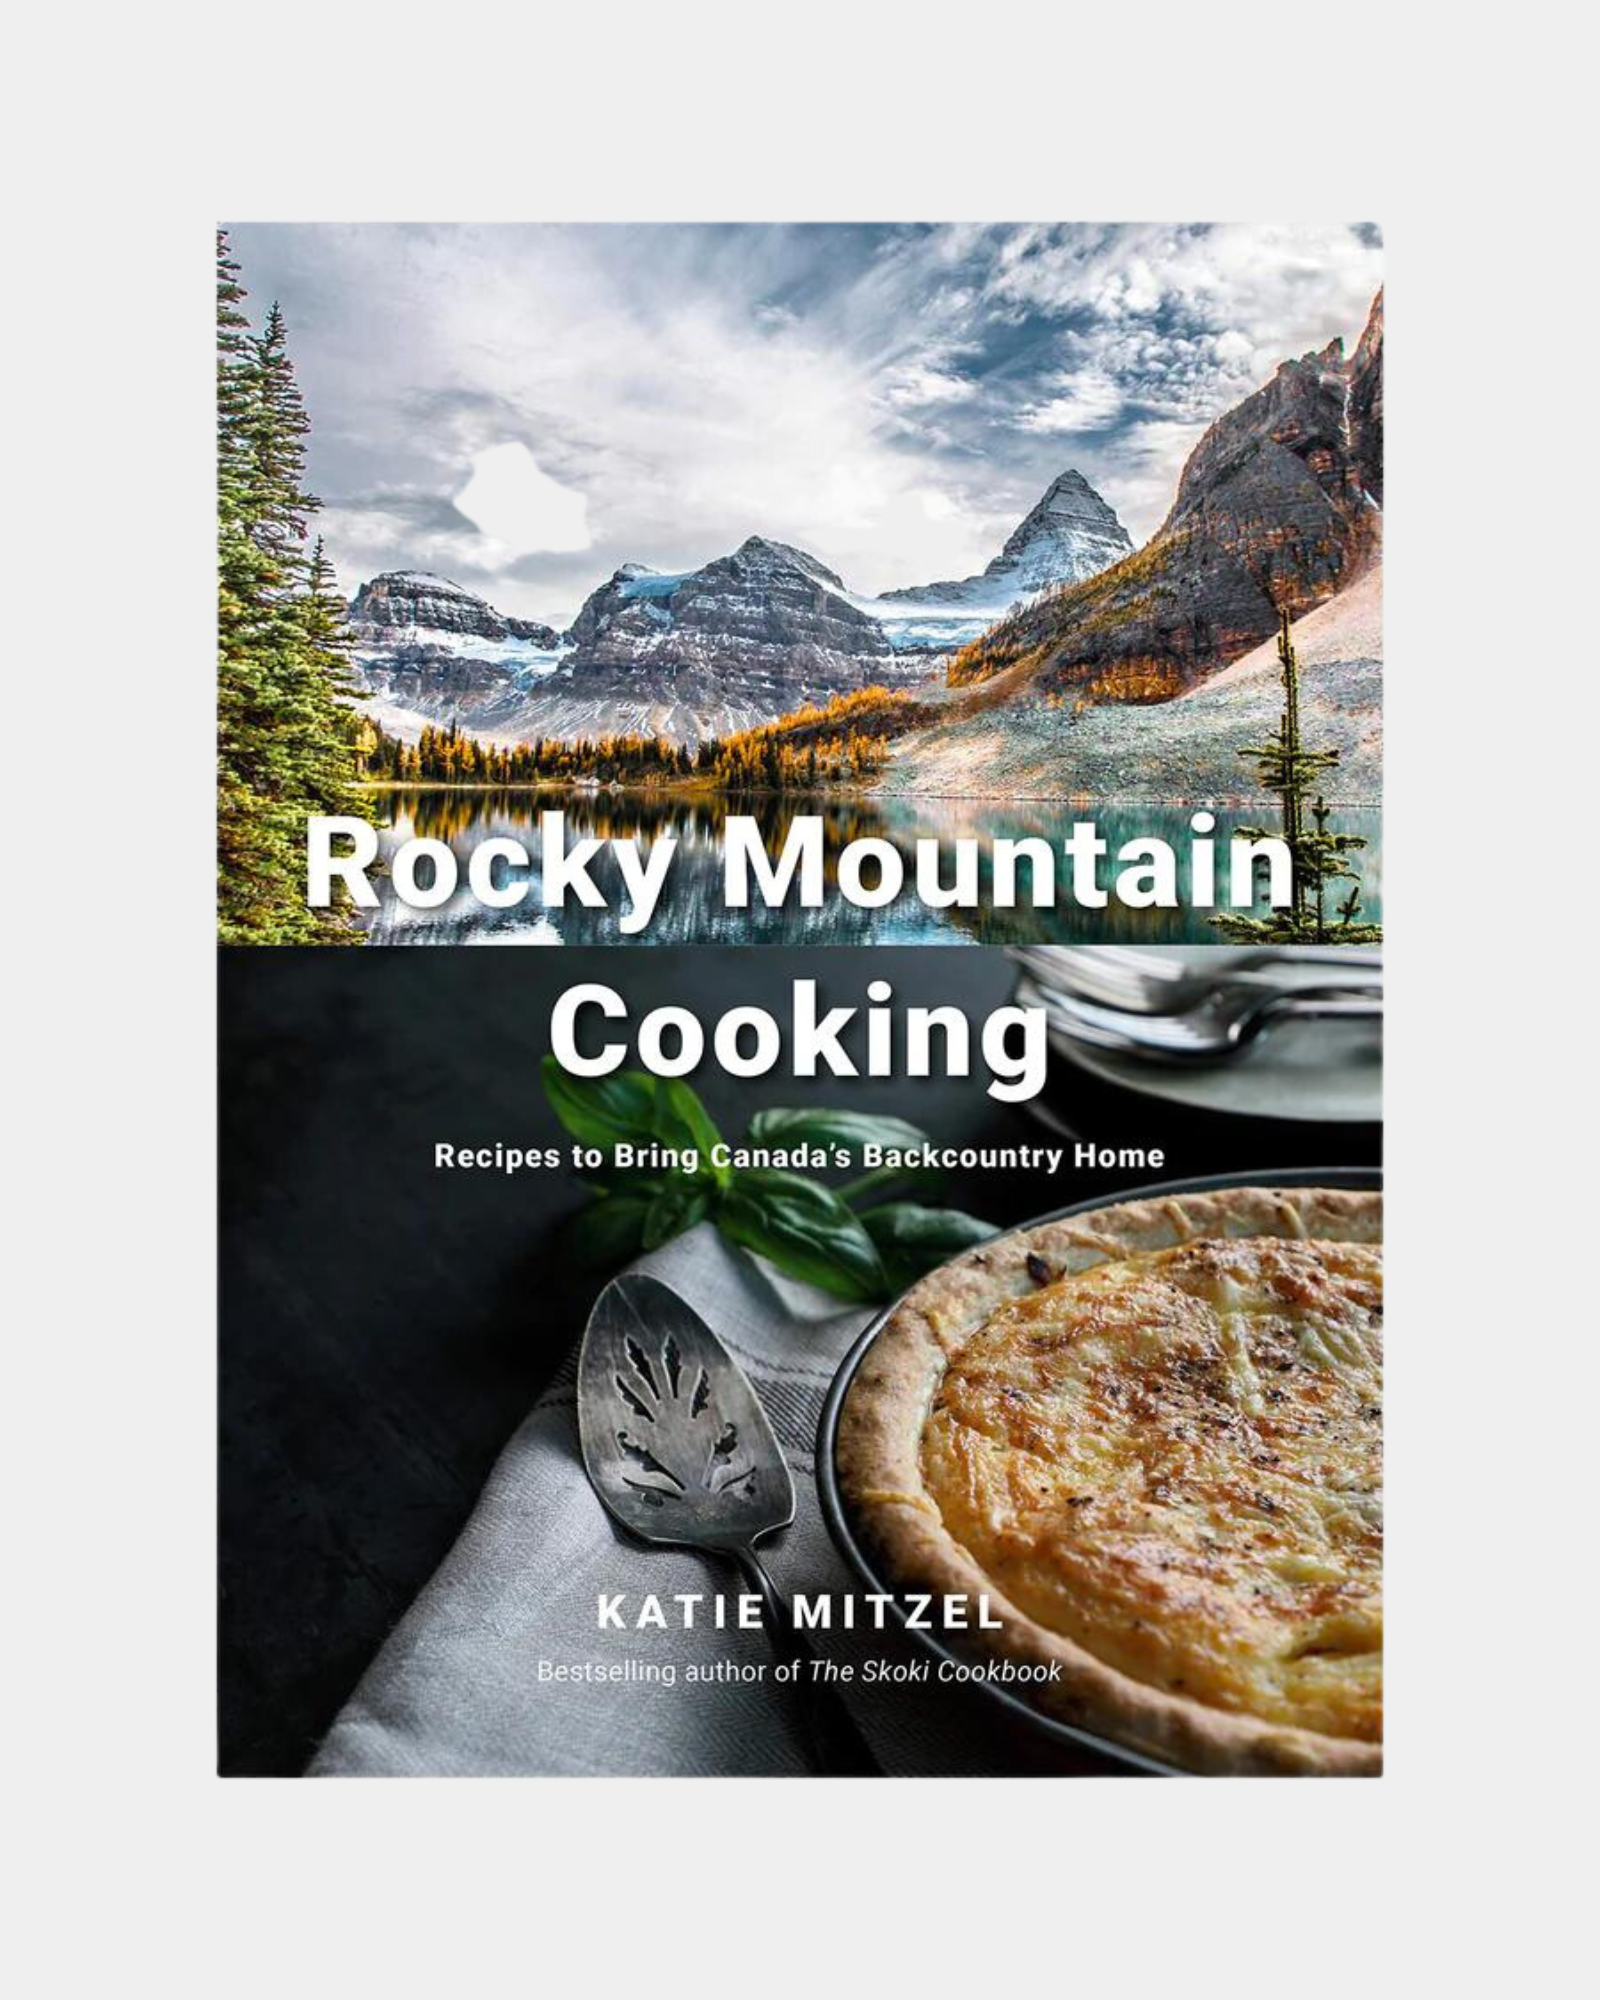 ROCKY MOUNTAIN COOKING